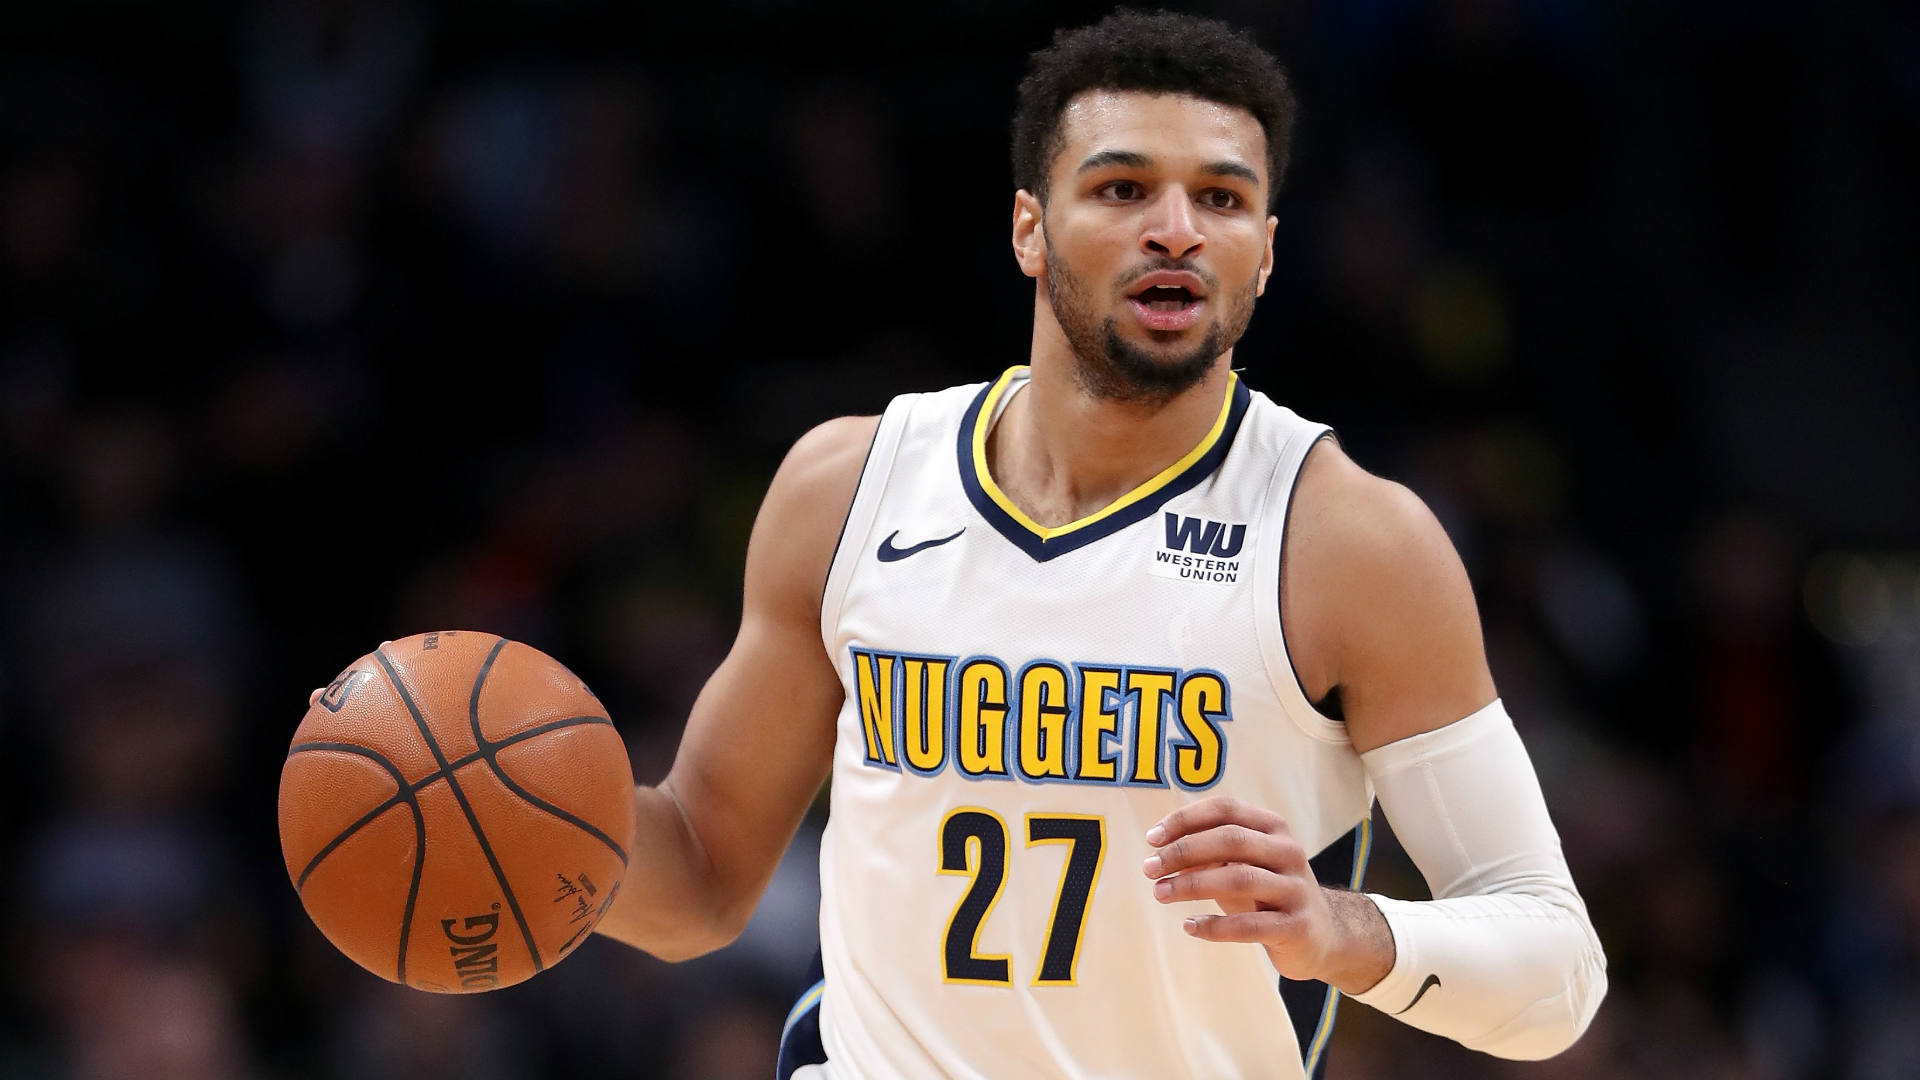 Why Nuggets' Jamal Murray is ready to make AllStar leap next season